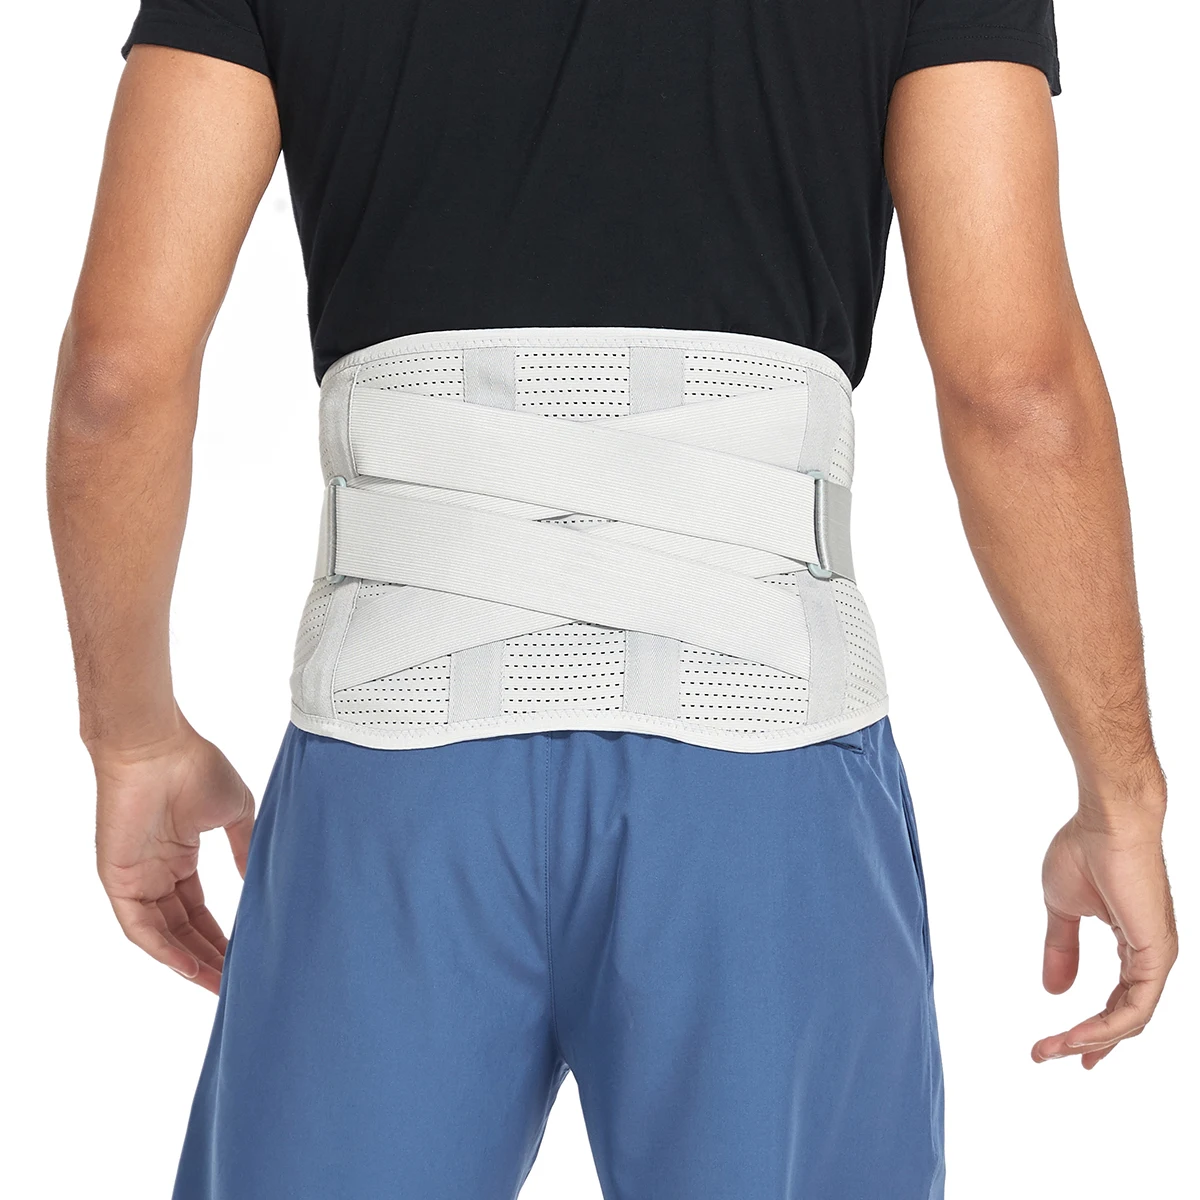 Back Brace for Men Breathable Waist Shapers Lumbar Lower Back Support Belt Herniated Disc Back Pain Relief Heavy Lifting updated waist massager support belt back pain relief lower lumbar pad 3 level hot compresses for physiotherapy rehabilitation